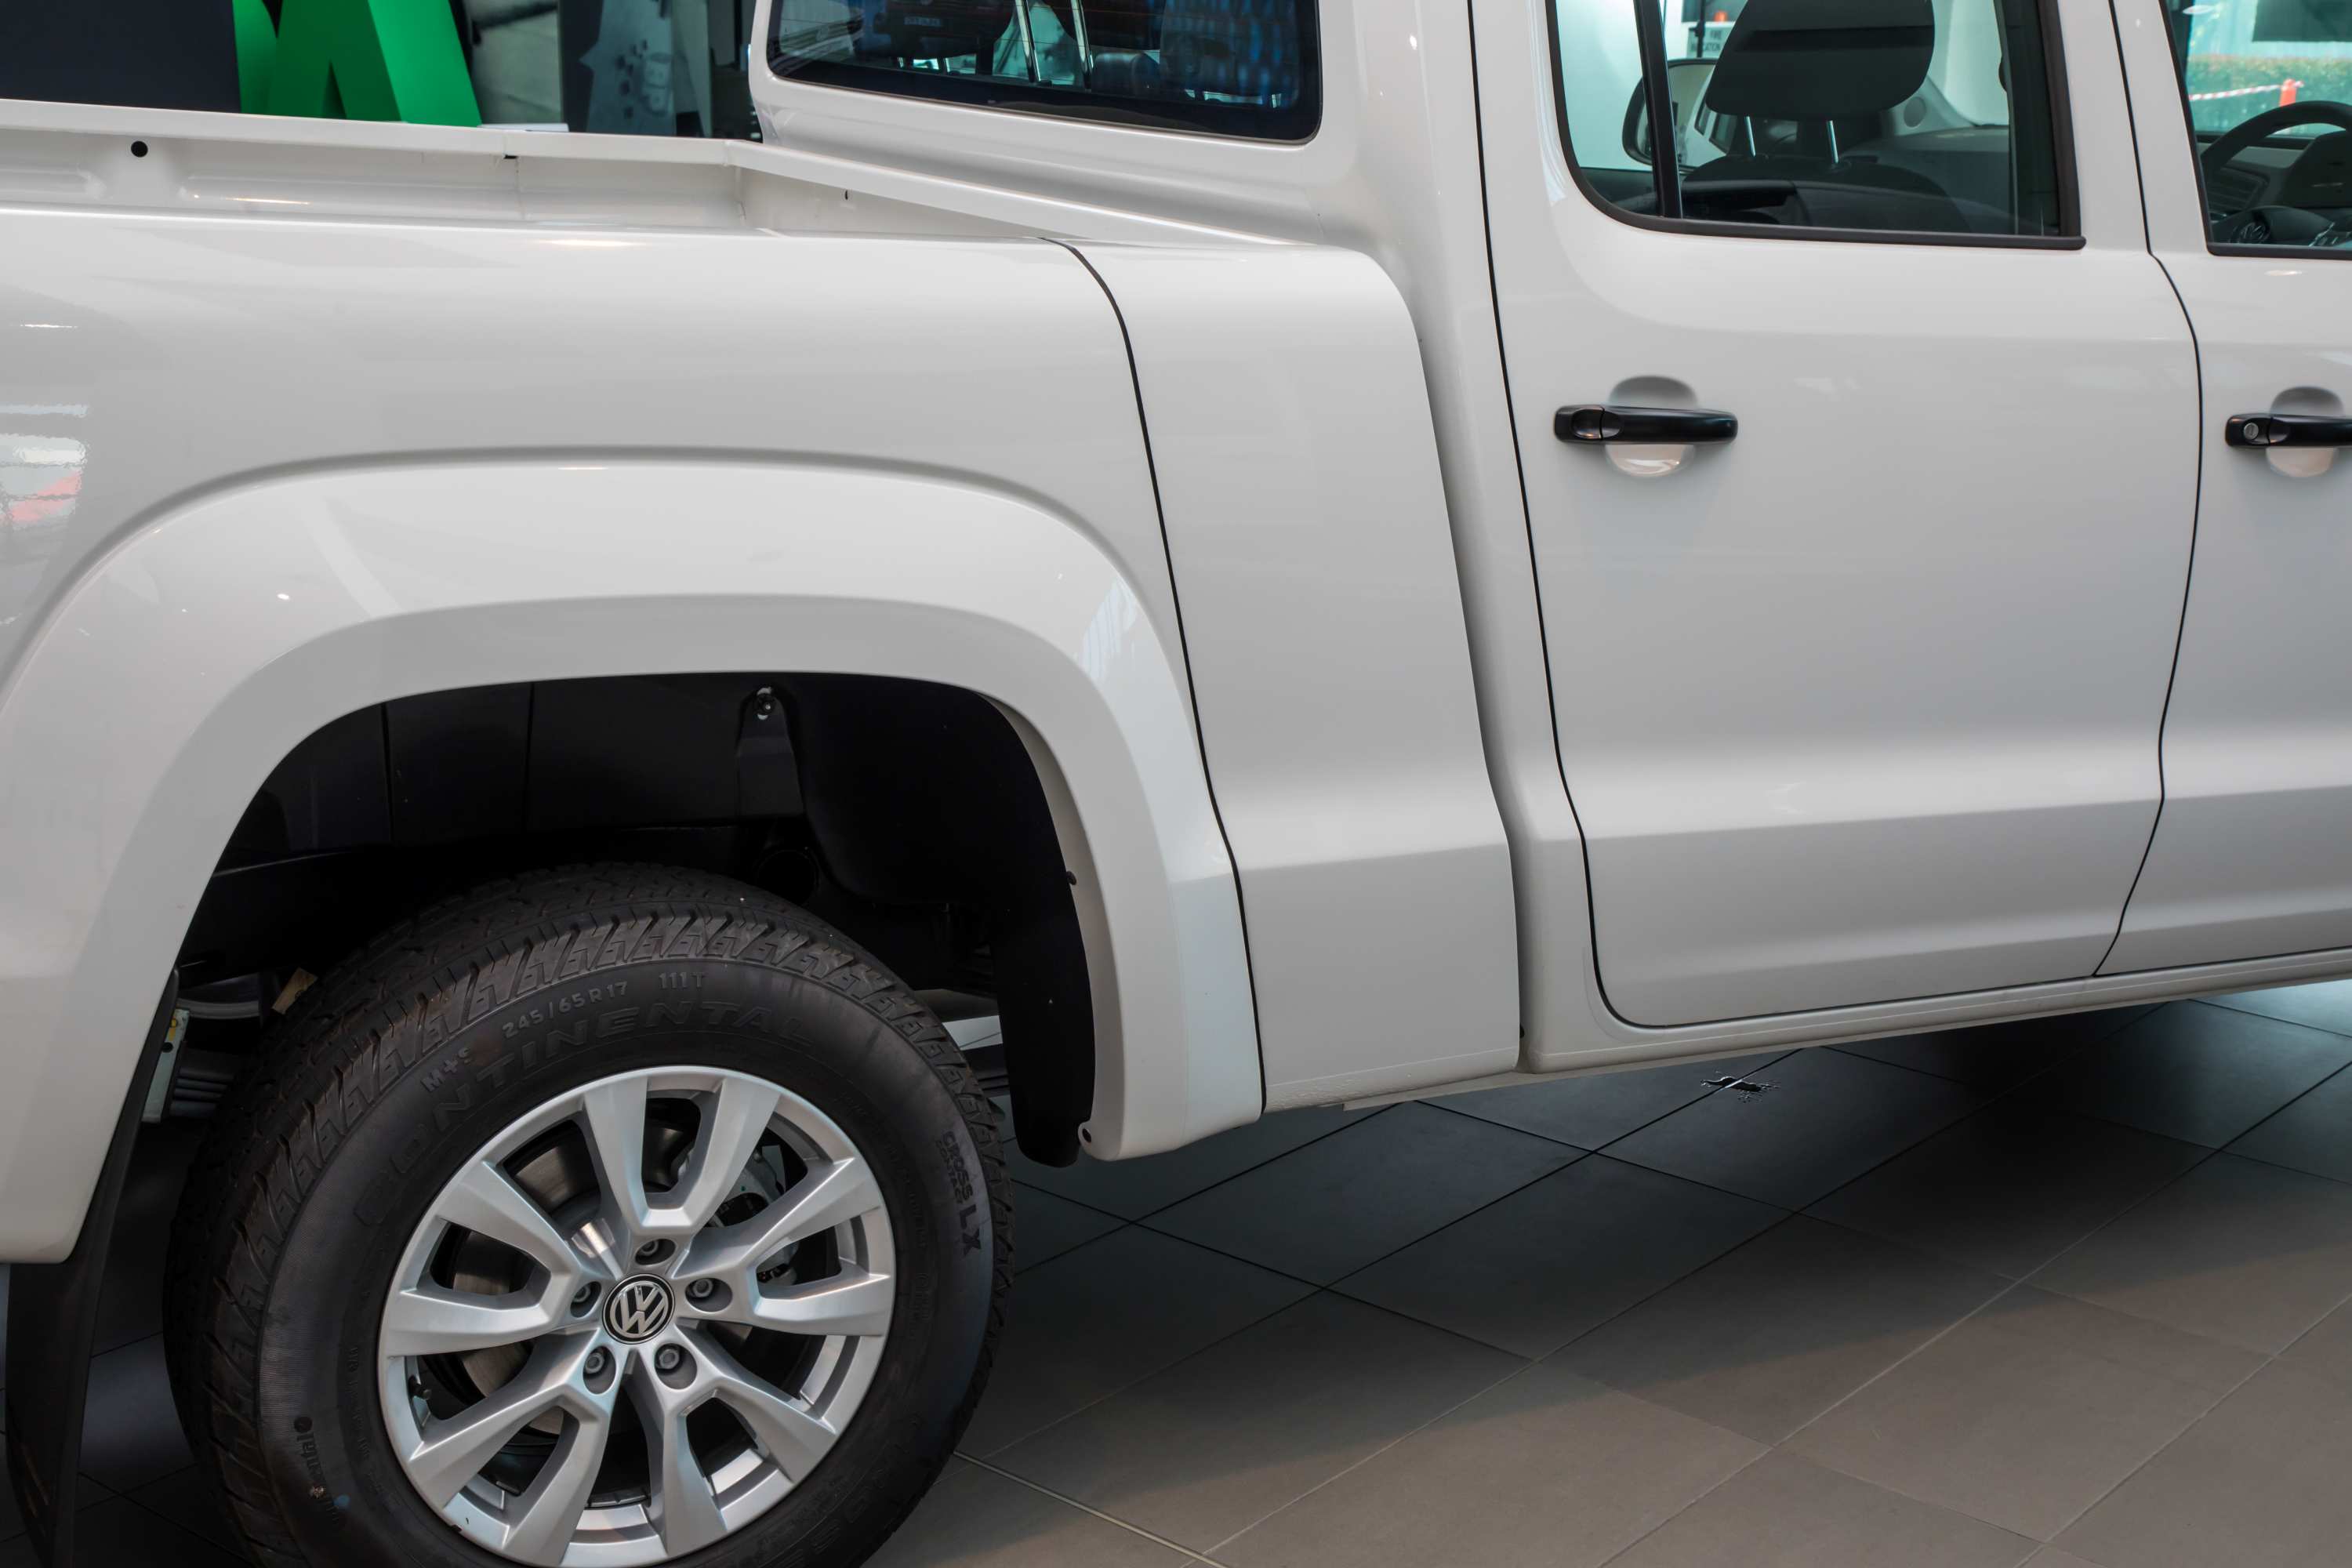 Volkswagen's new Factory endorsed range, the stretched Amarok in XL and XXL guise, is on sale now, offering customers a purpose-built, turn-key solution.